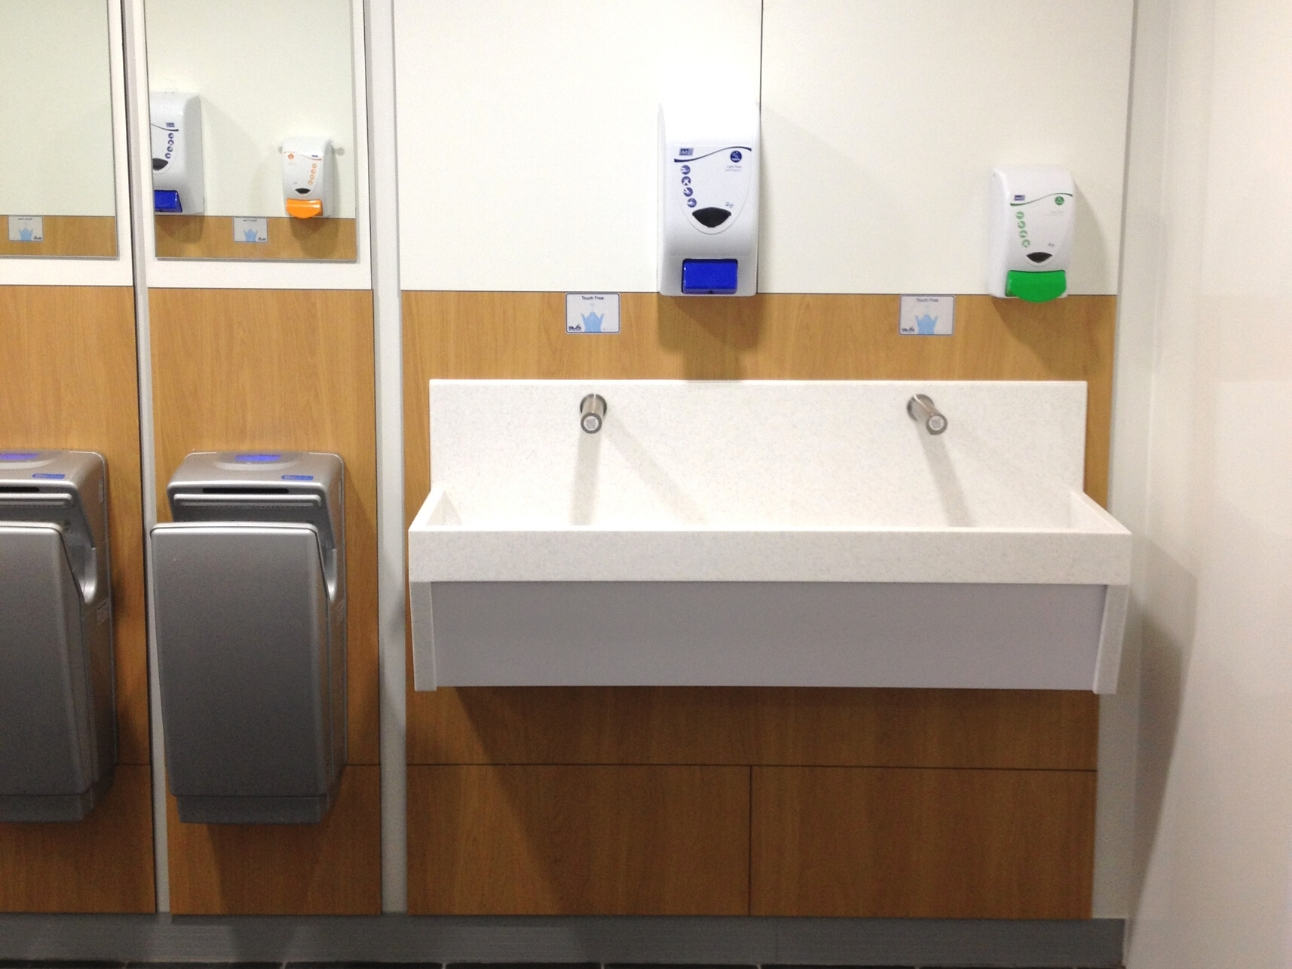 Stannah Stairlifts Case Study | Commercial Washrooms